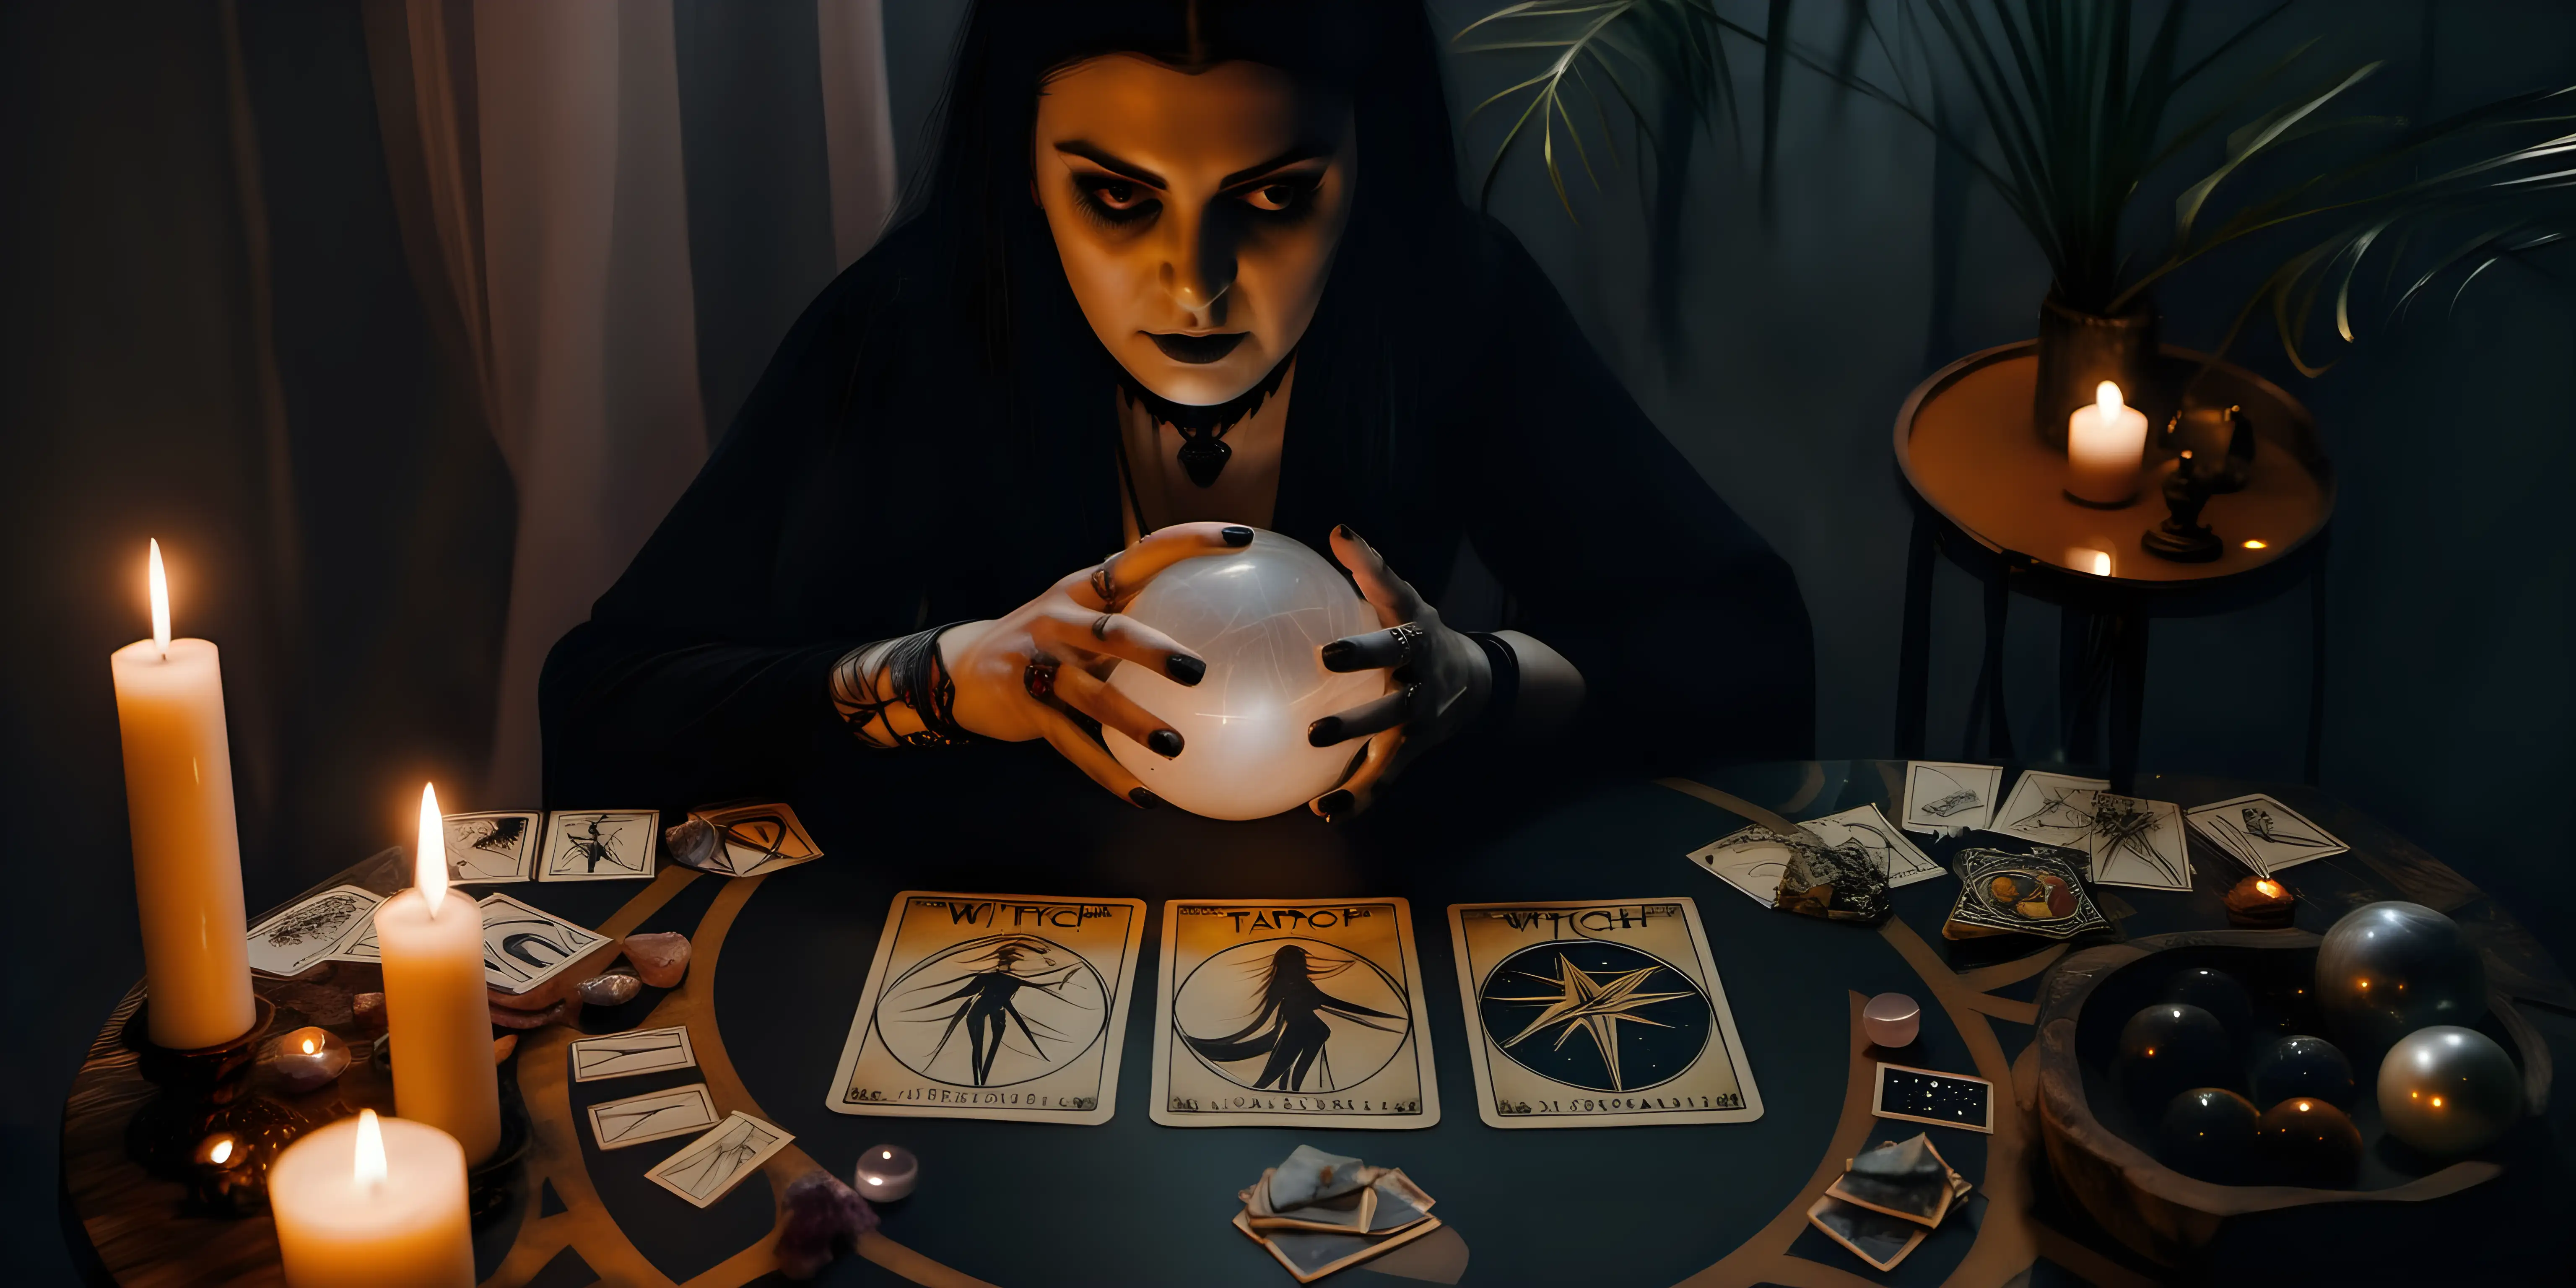 a witch reading tarot cards ,she has a crystal ball on the table & palmistry